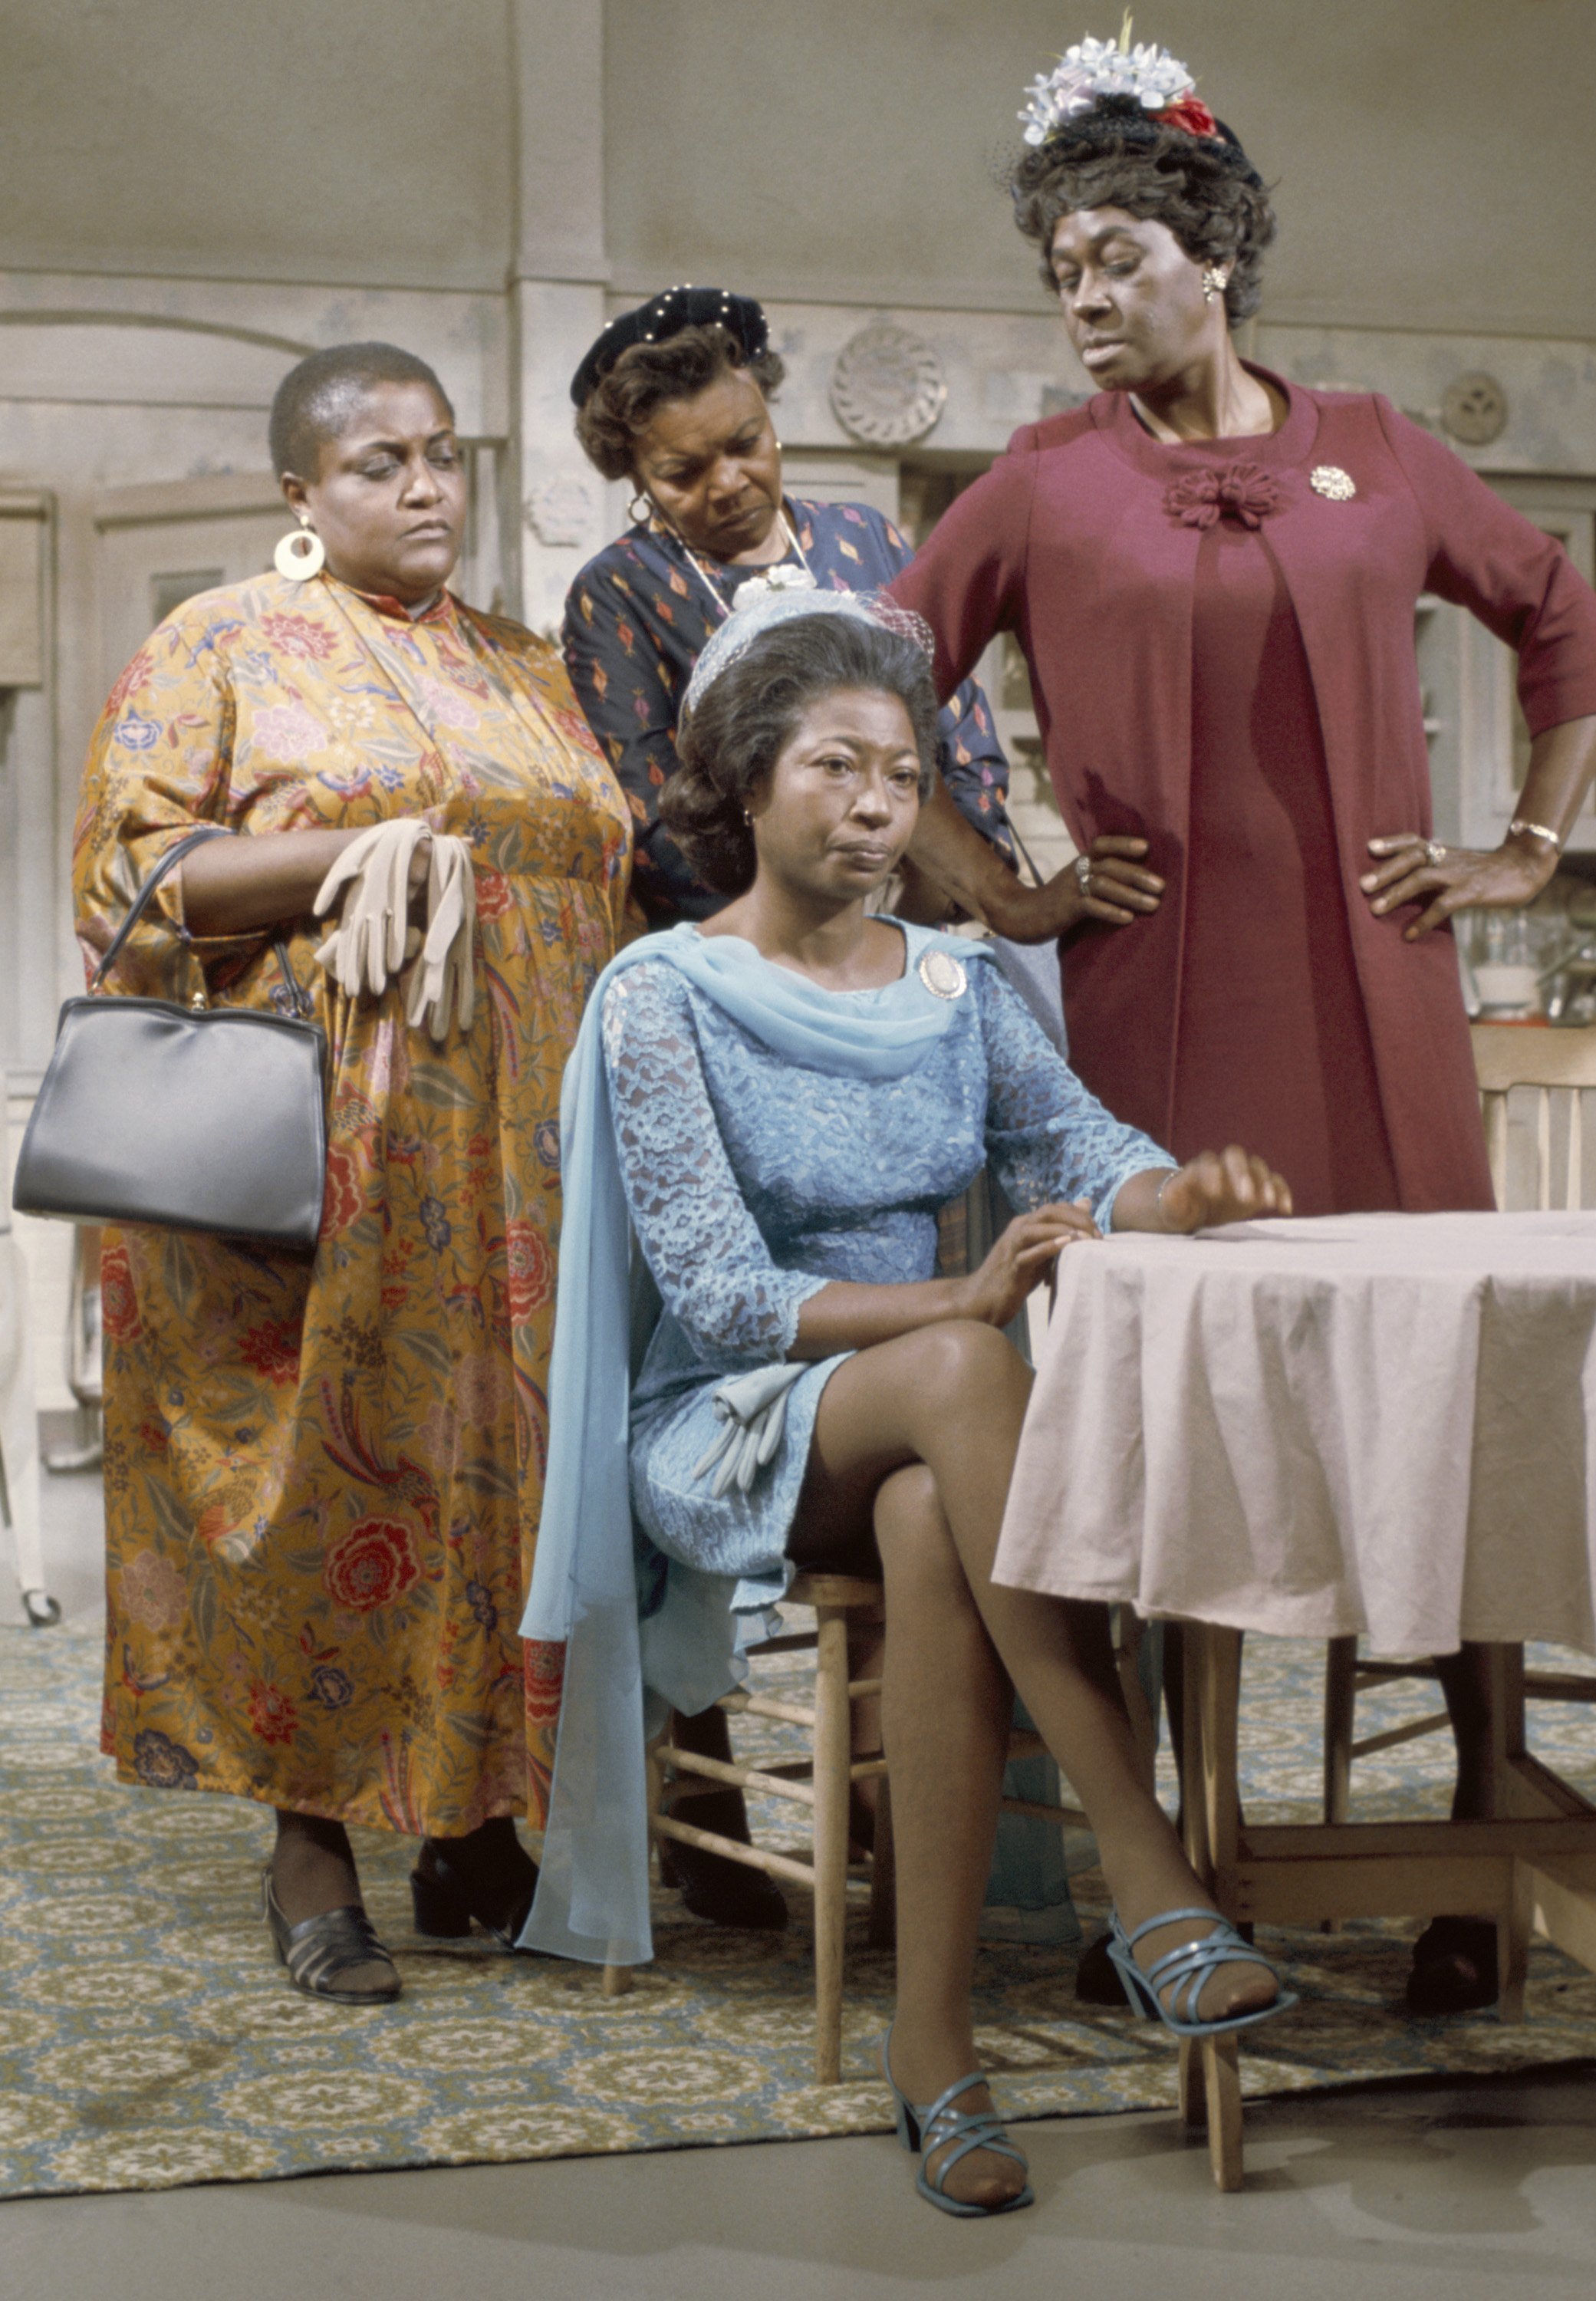 Lynn Hamilton (sitting) and LaWanda Page (front right) as their characters on "Sanford and Son." | Photo: Getty Images